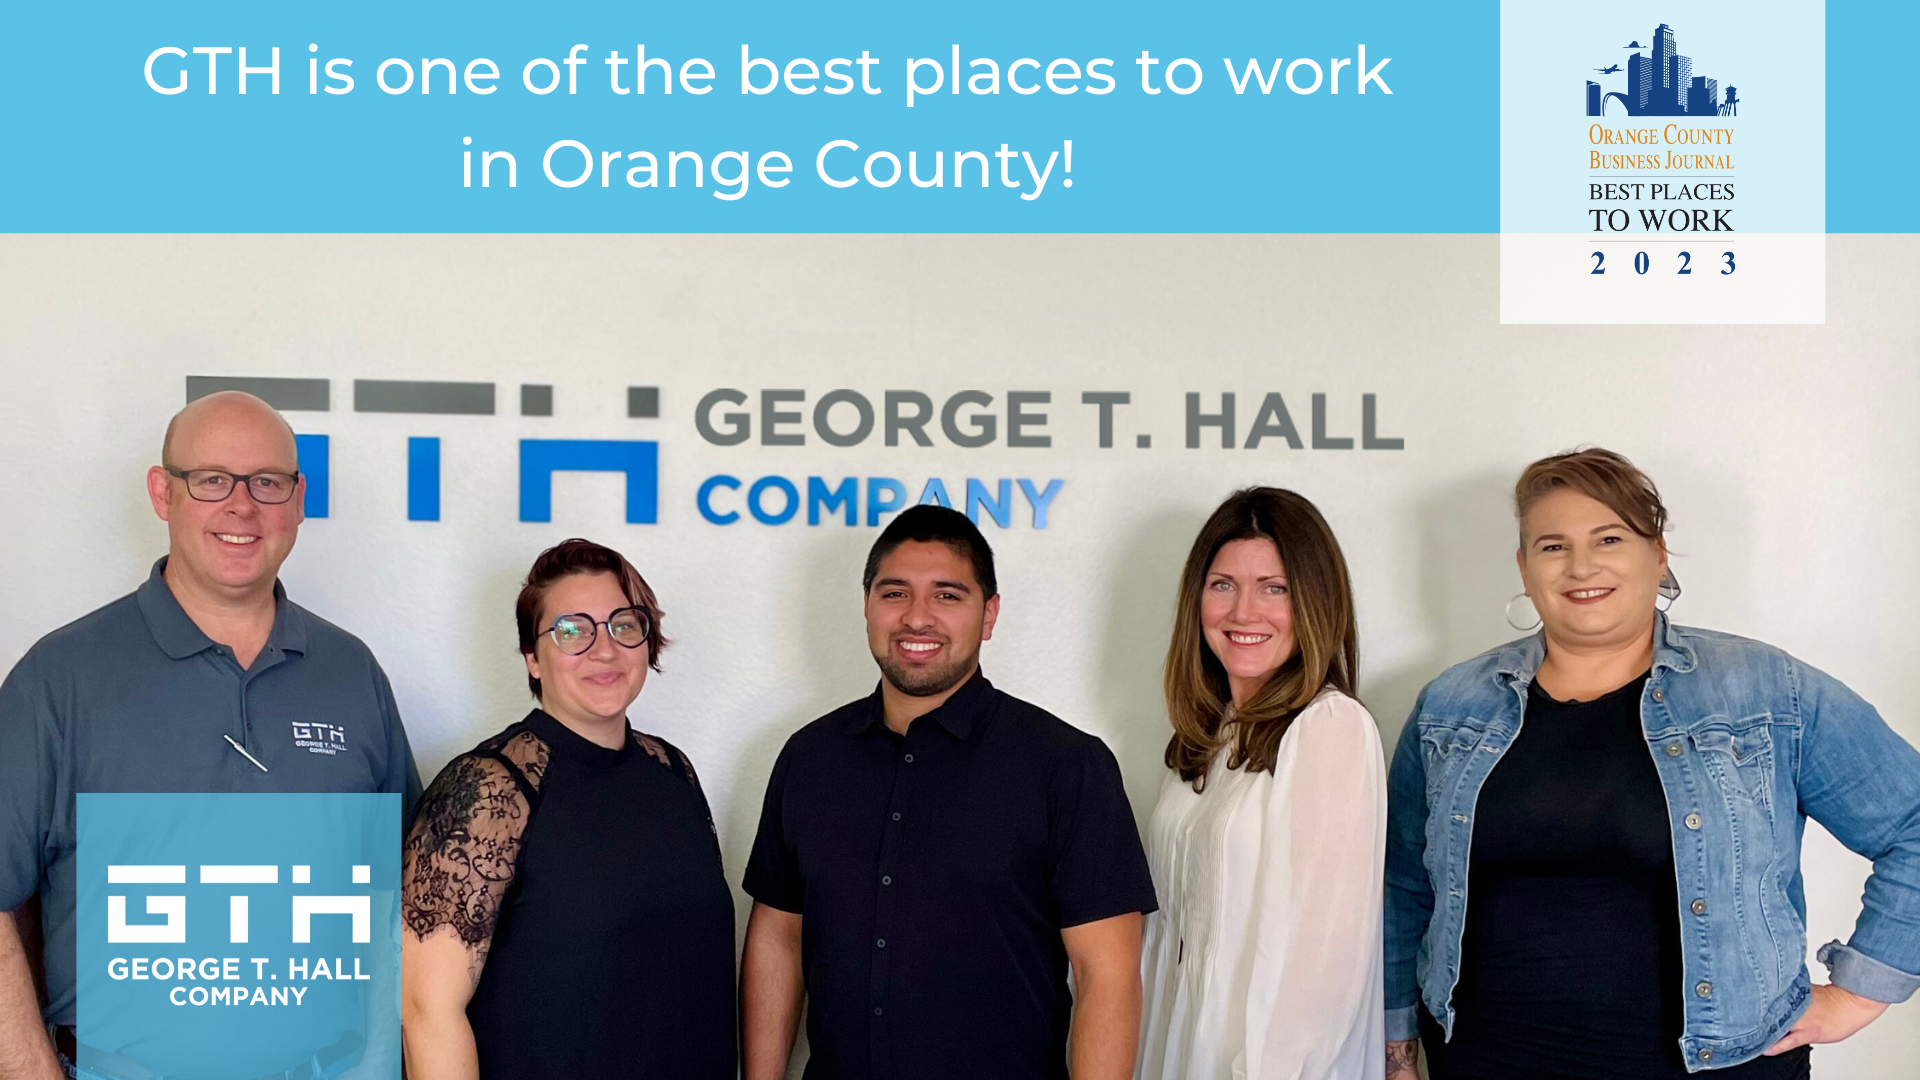 Orange County Business Journal announces GTH as one of the Best Places to work in OC